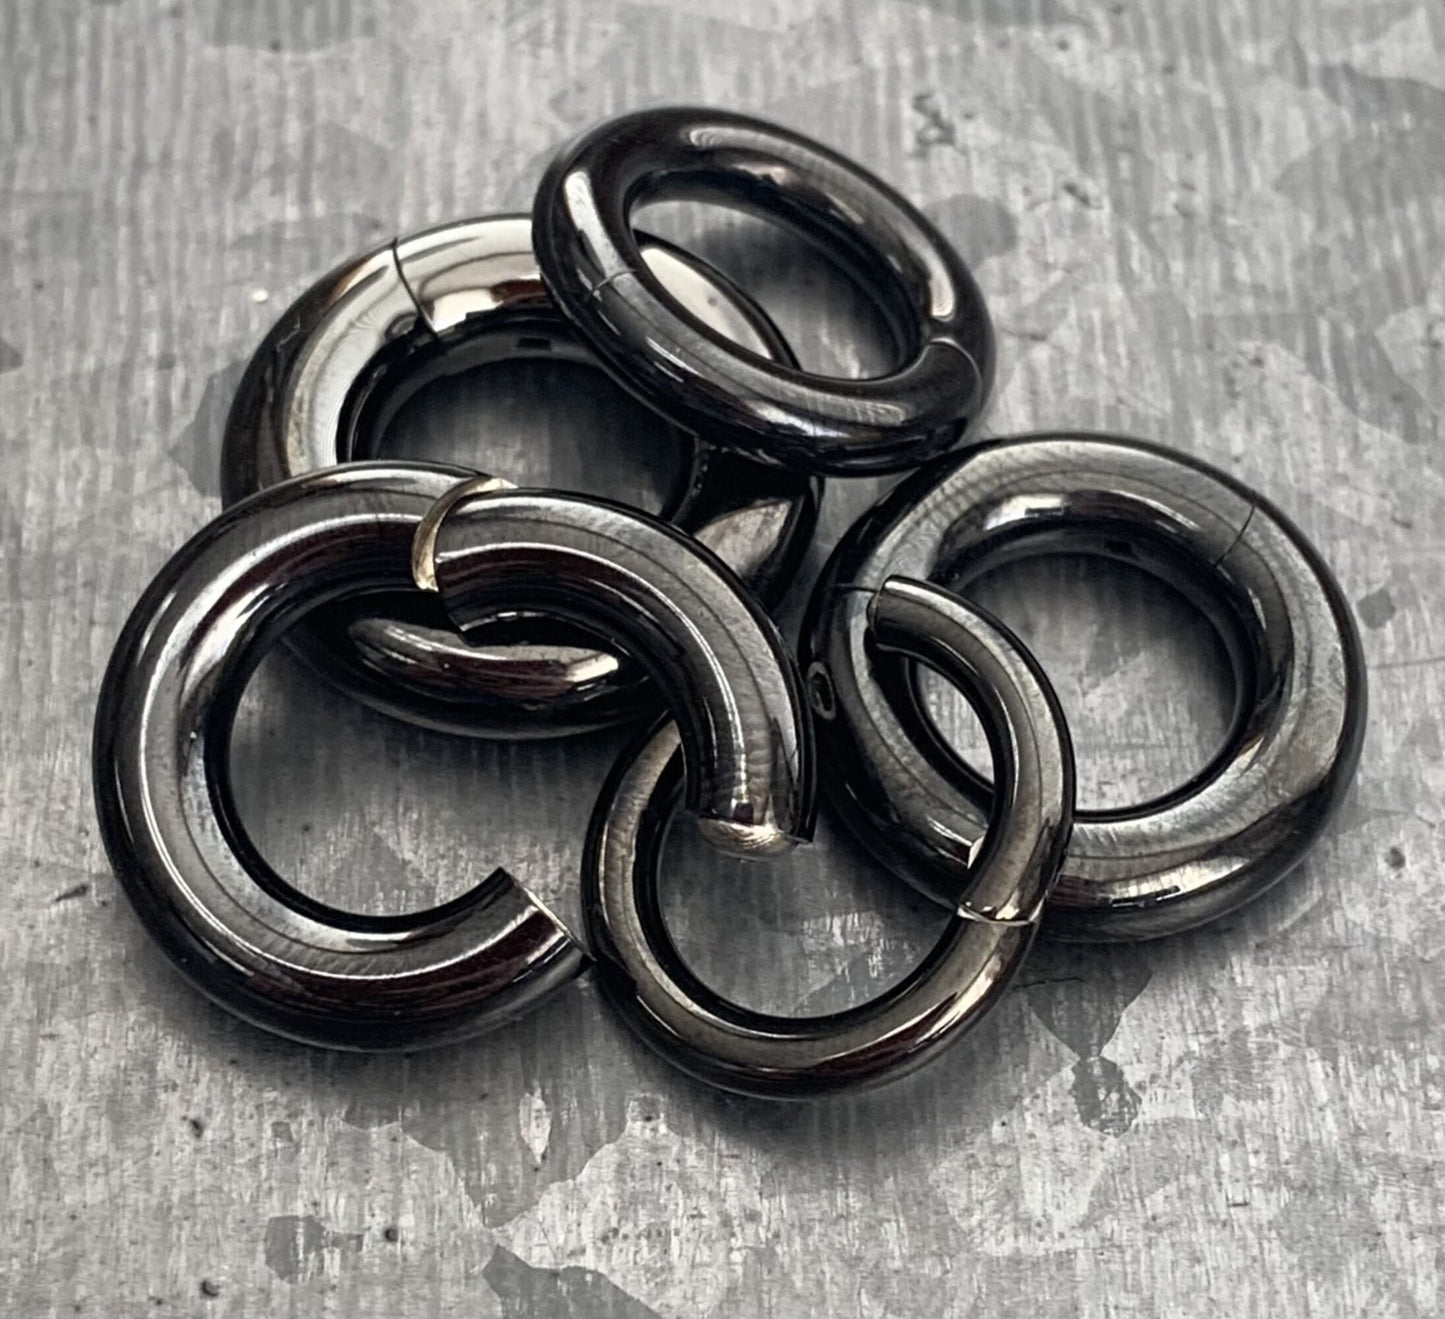 1 Piece Large Gauge Steel Hinged Segment Ring/Hoop - Easy and Secure Clickers - Gauges 8g (3.2mm) thru 2g (6mm) Available!